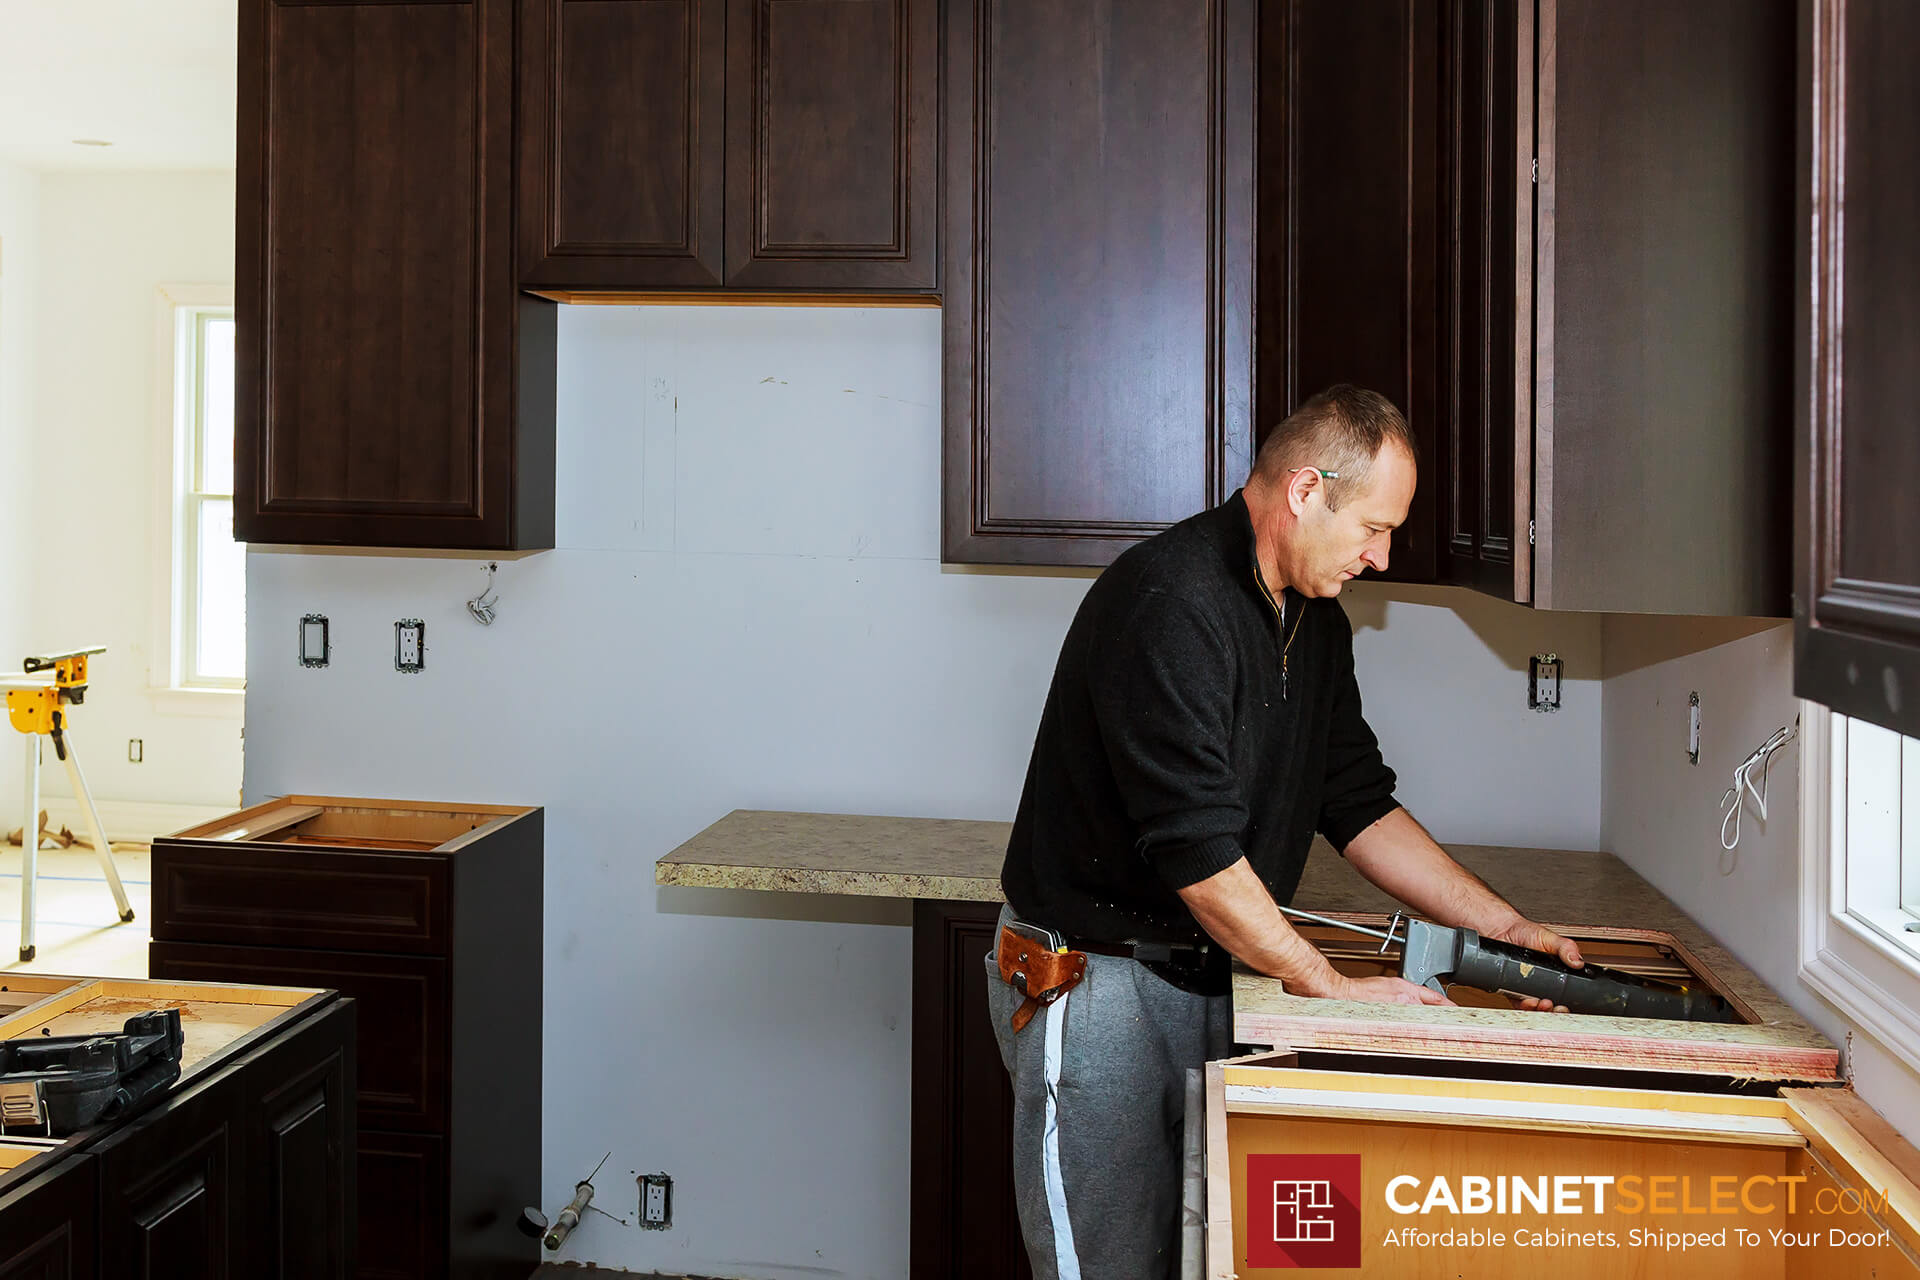 https://cabinetselect.com/cswp/wp-content/uploads/2020/10/how-to-remodel-kitchen.jpg